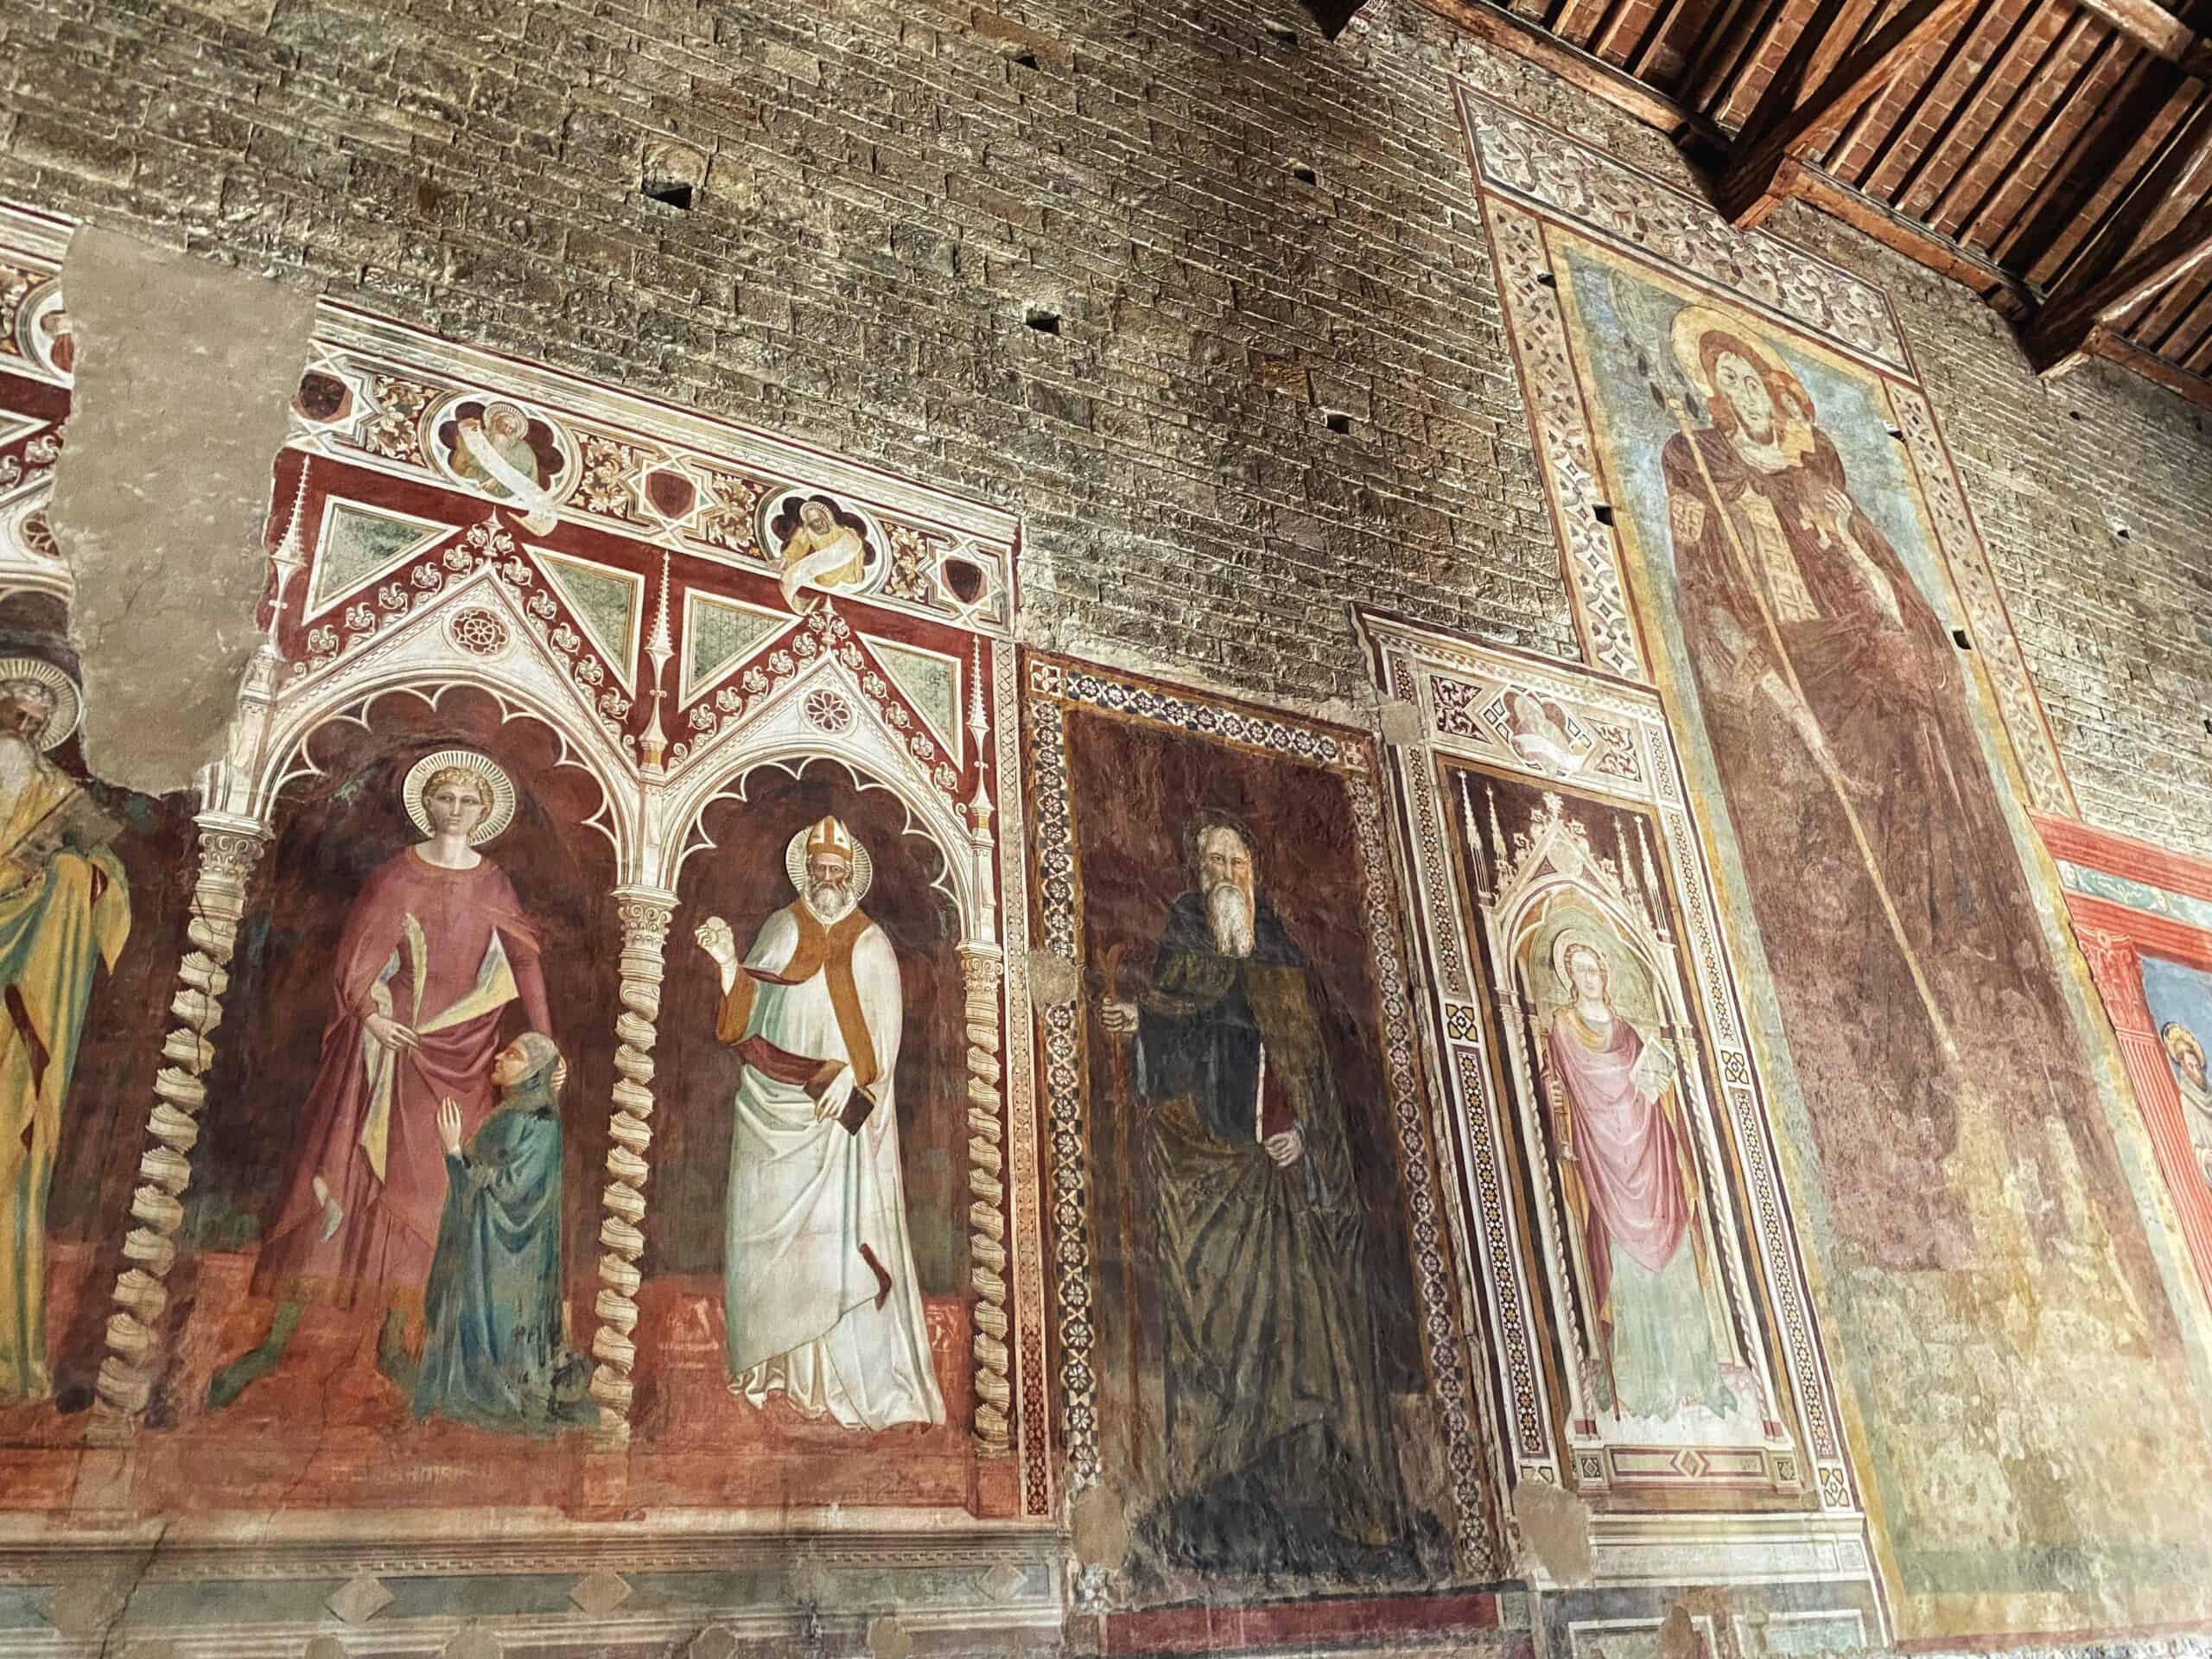 Frescoes in the Basilica of San Miniato al Monte in Florence, Italy.